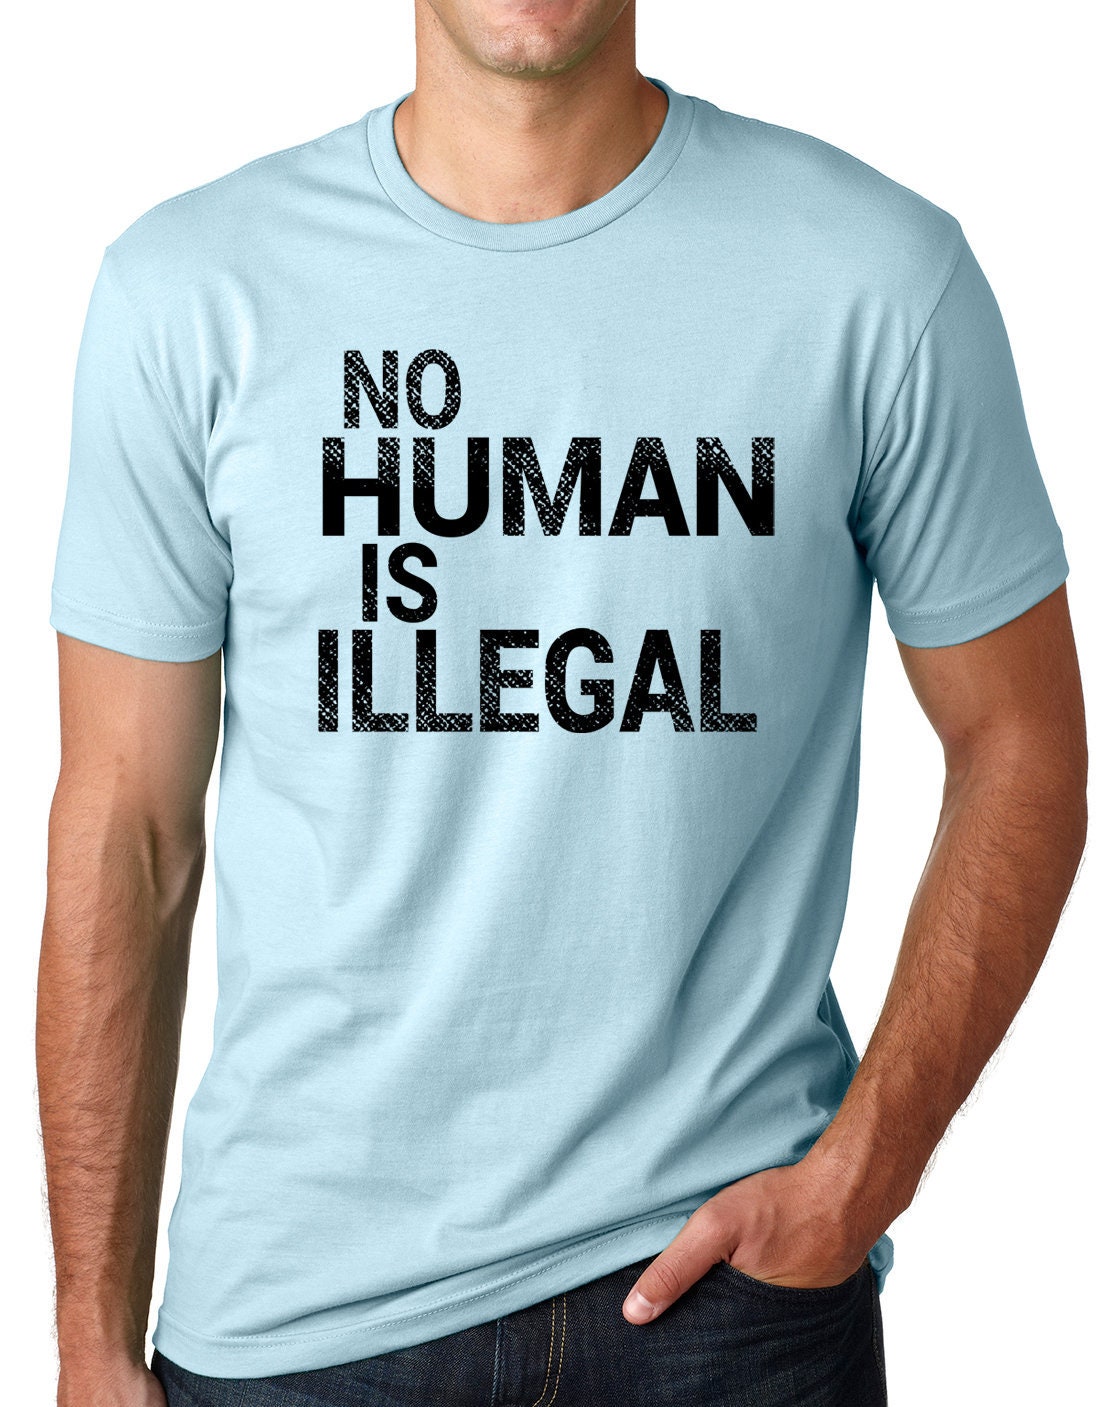 No Human is Illegal Humanitarian t-shirt immigration tee | Etsy